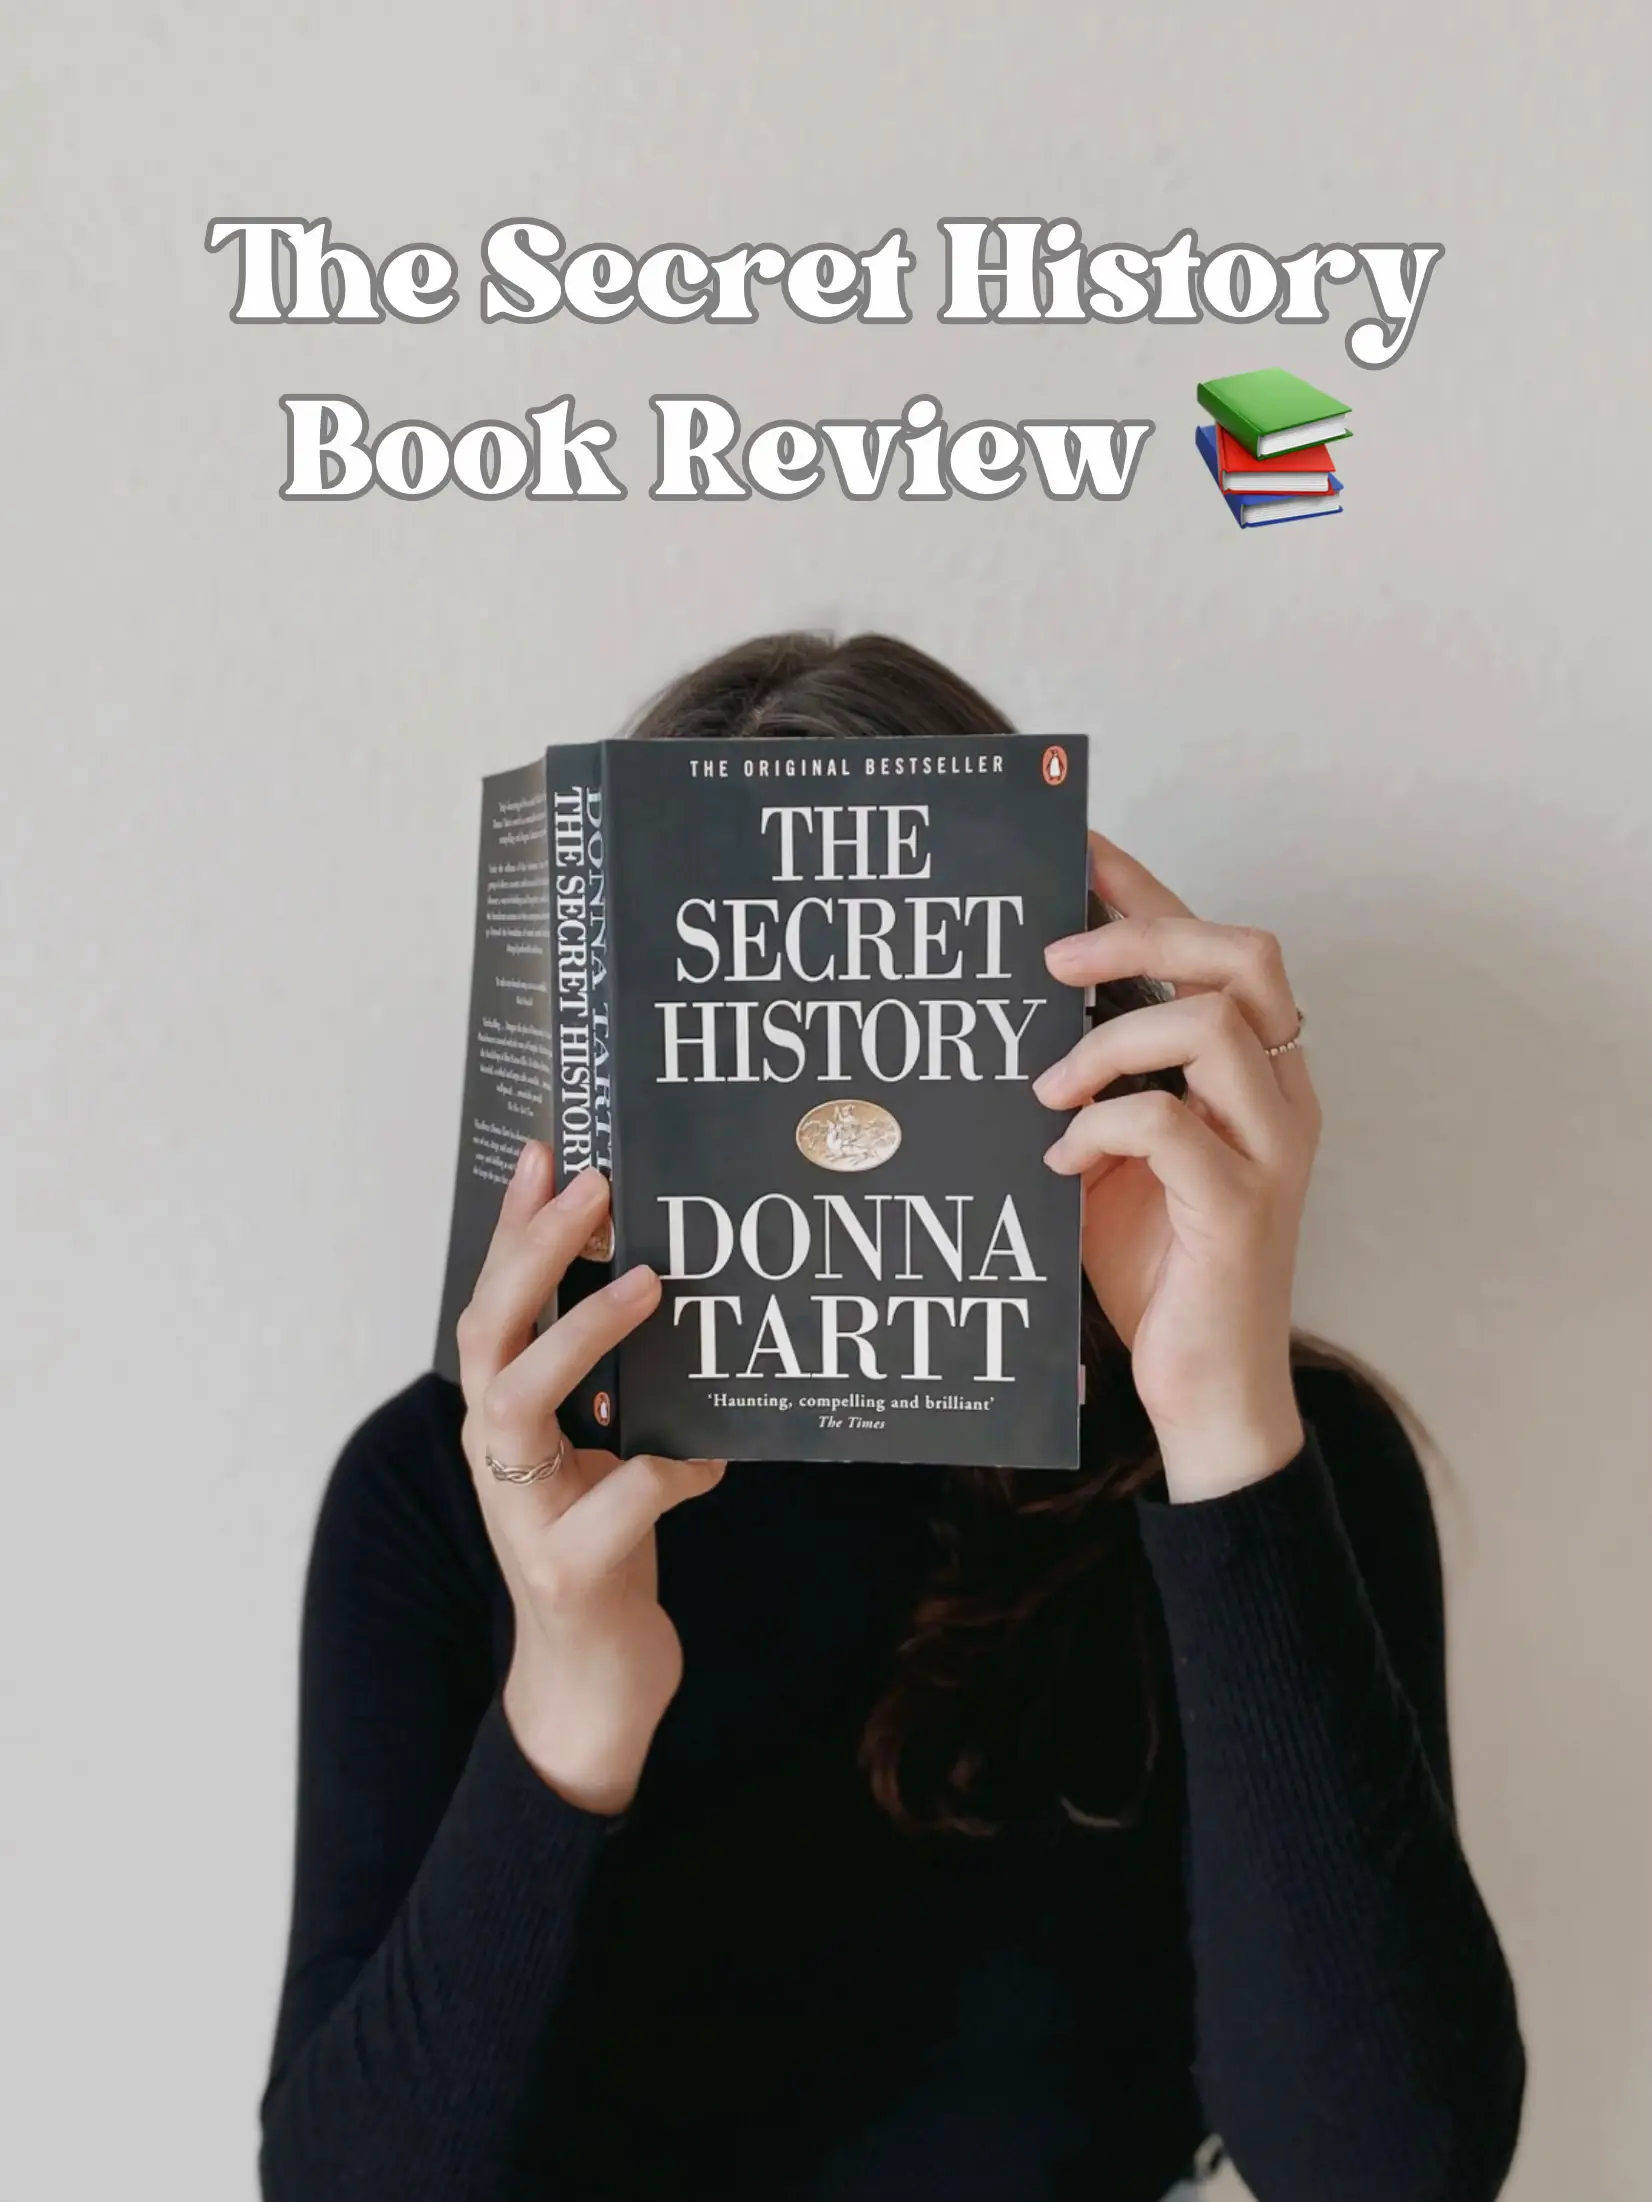 The Secret History Summary of Key Ideas and Review